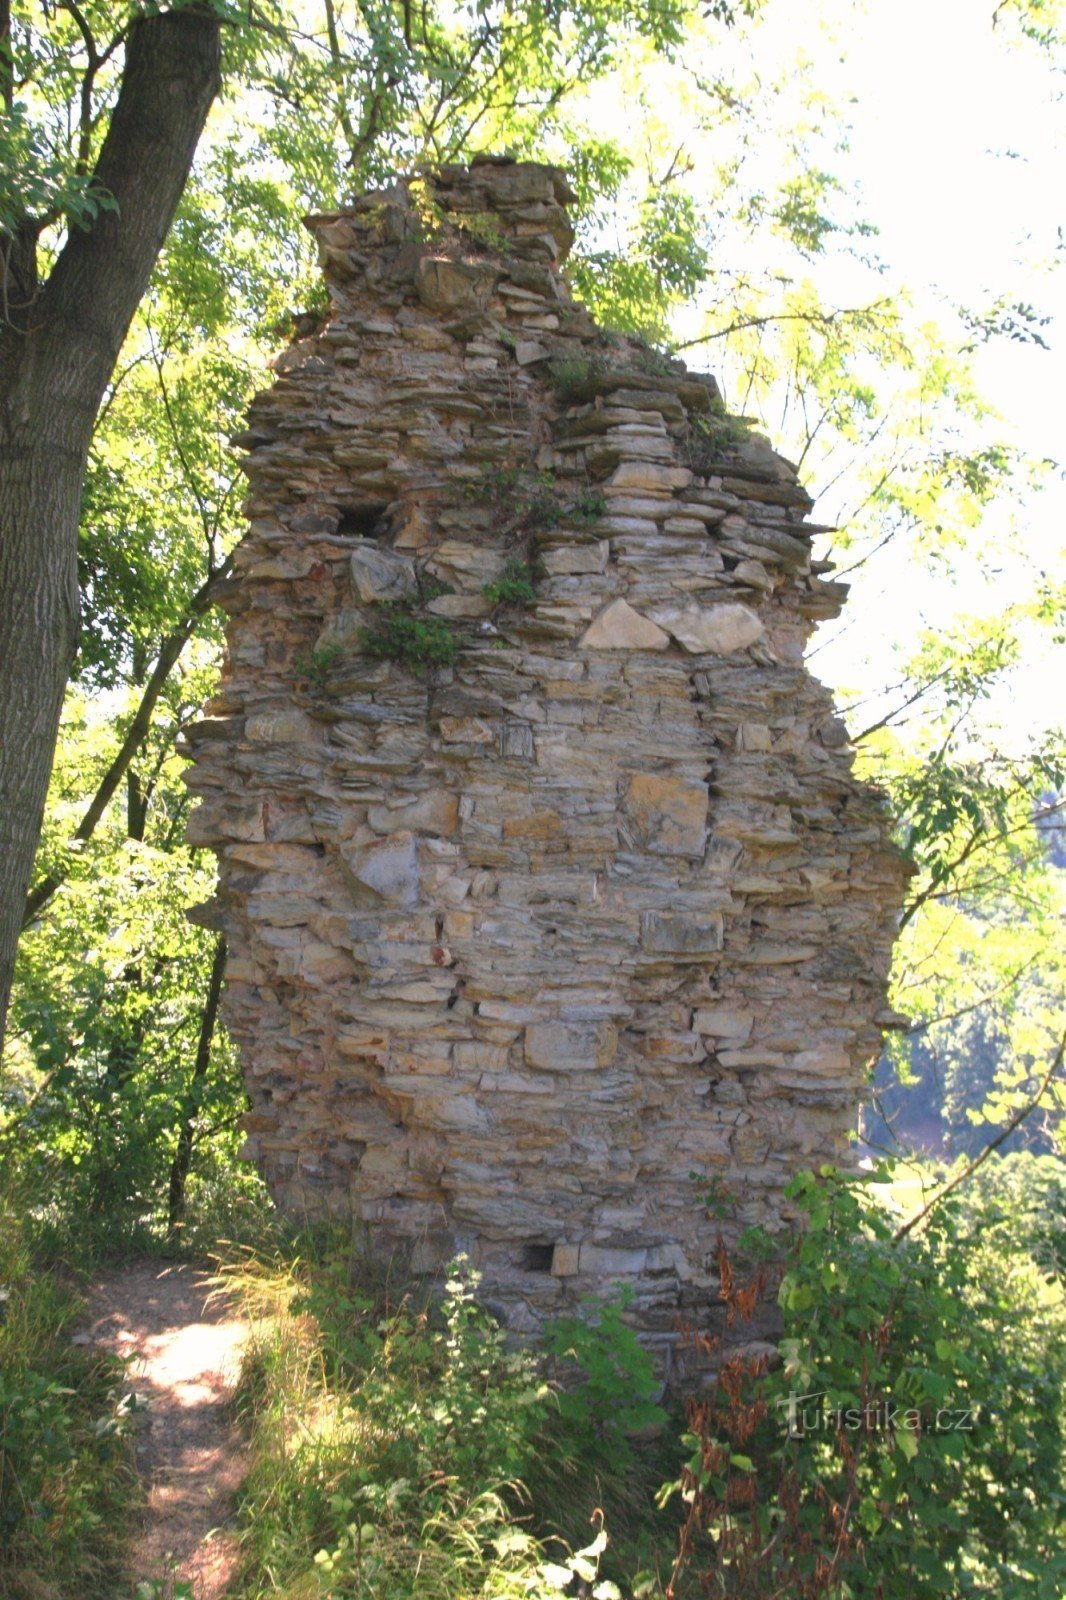 The remains of the castle's masonry